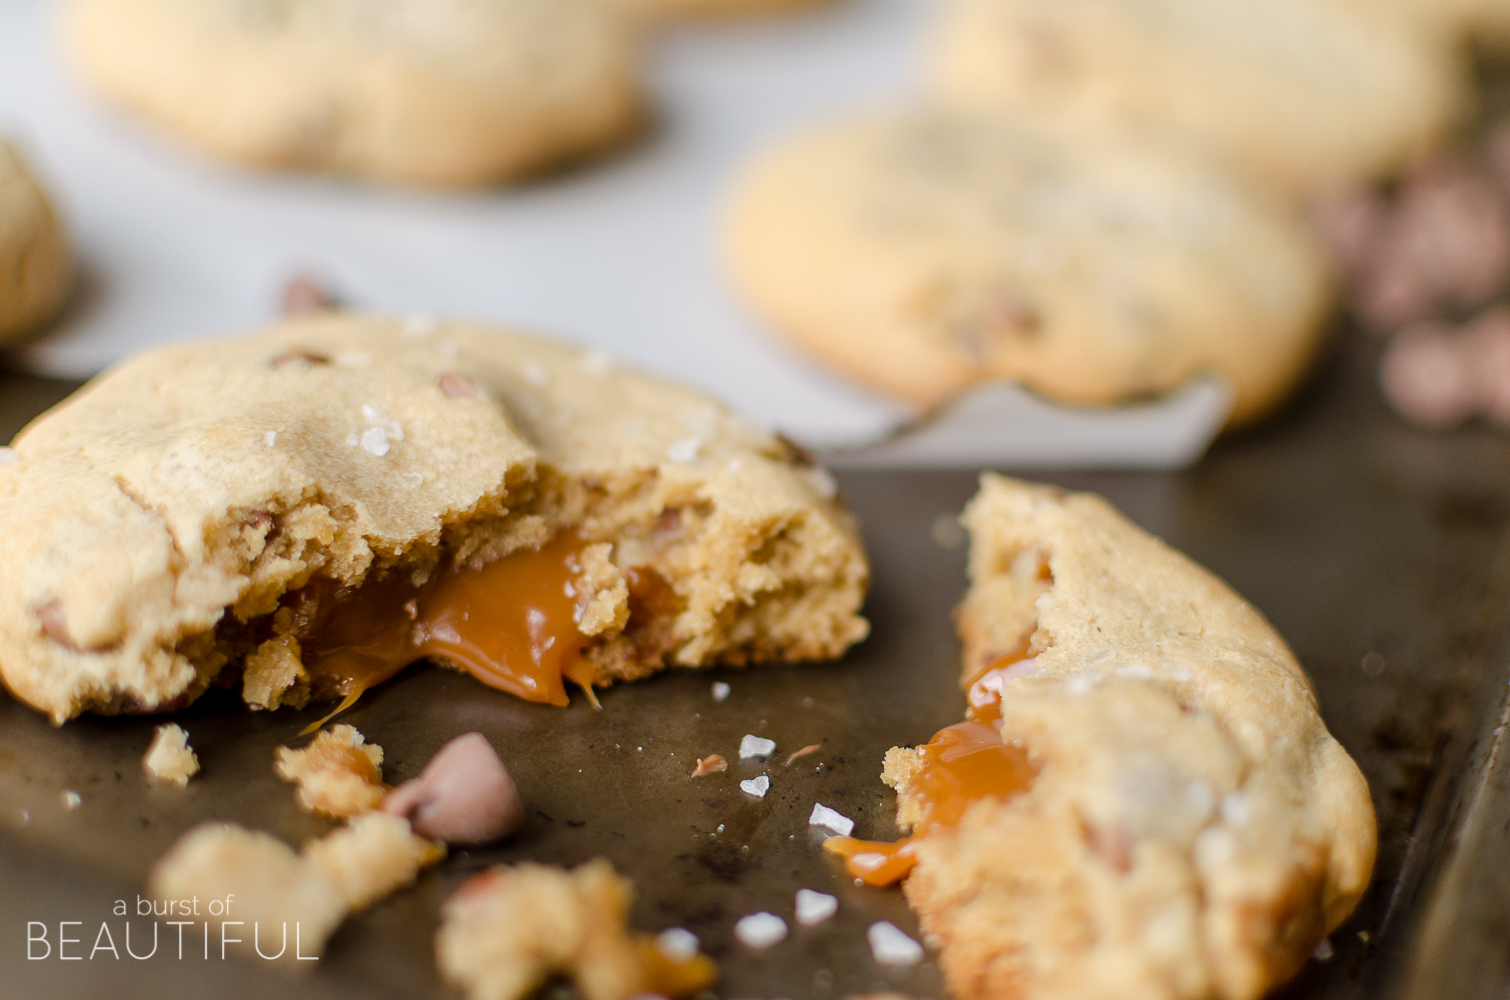 These caramel chocolate chip cookies are filled with a rich caramel center and melt-in-your-mouth chocolate chips. 